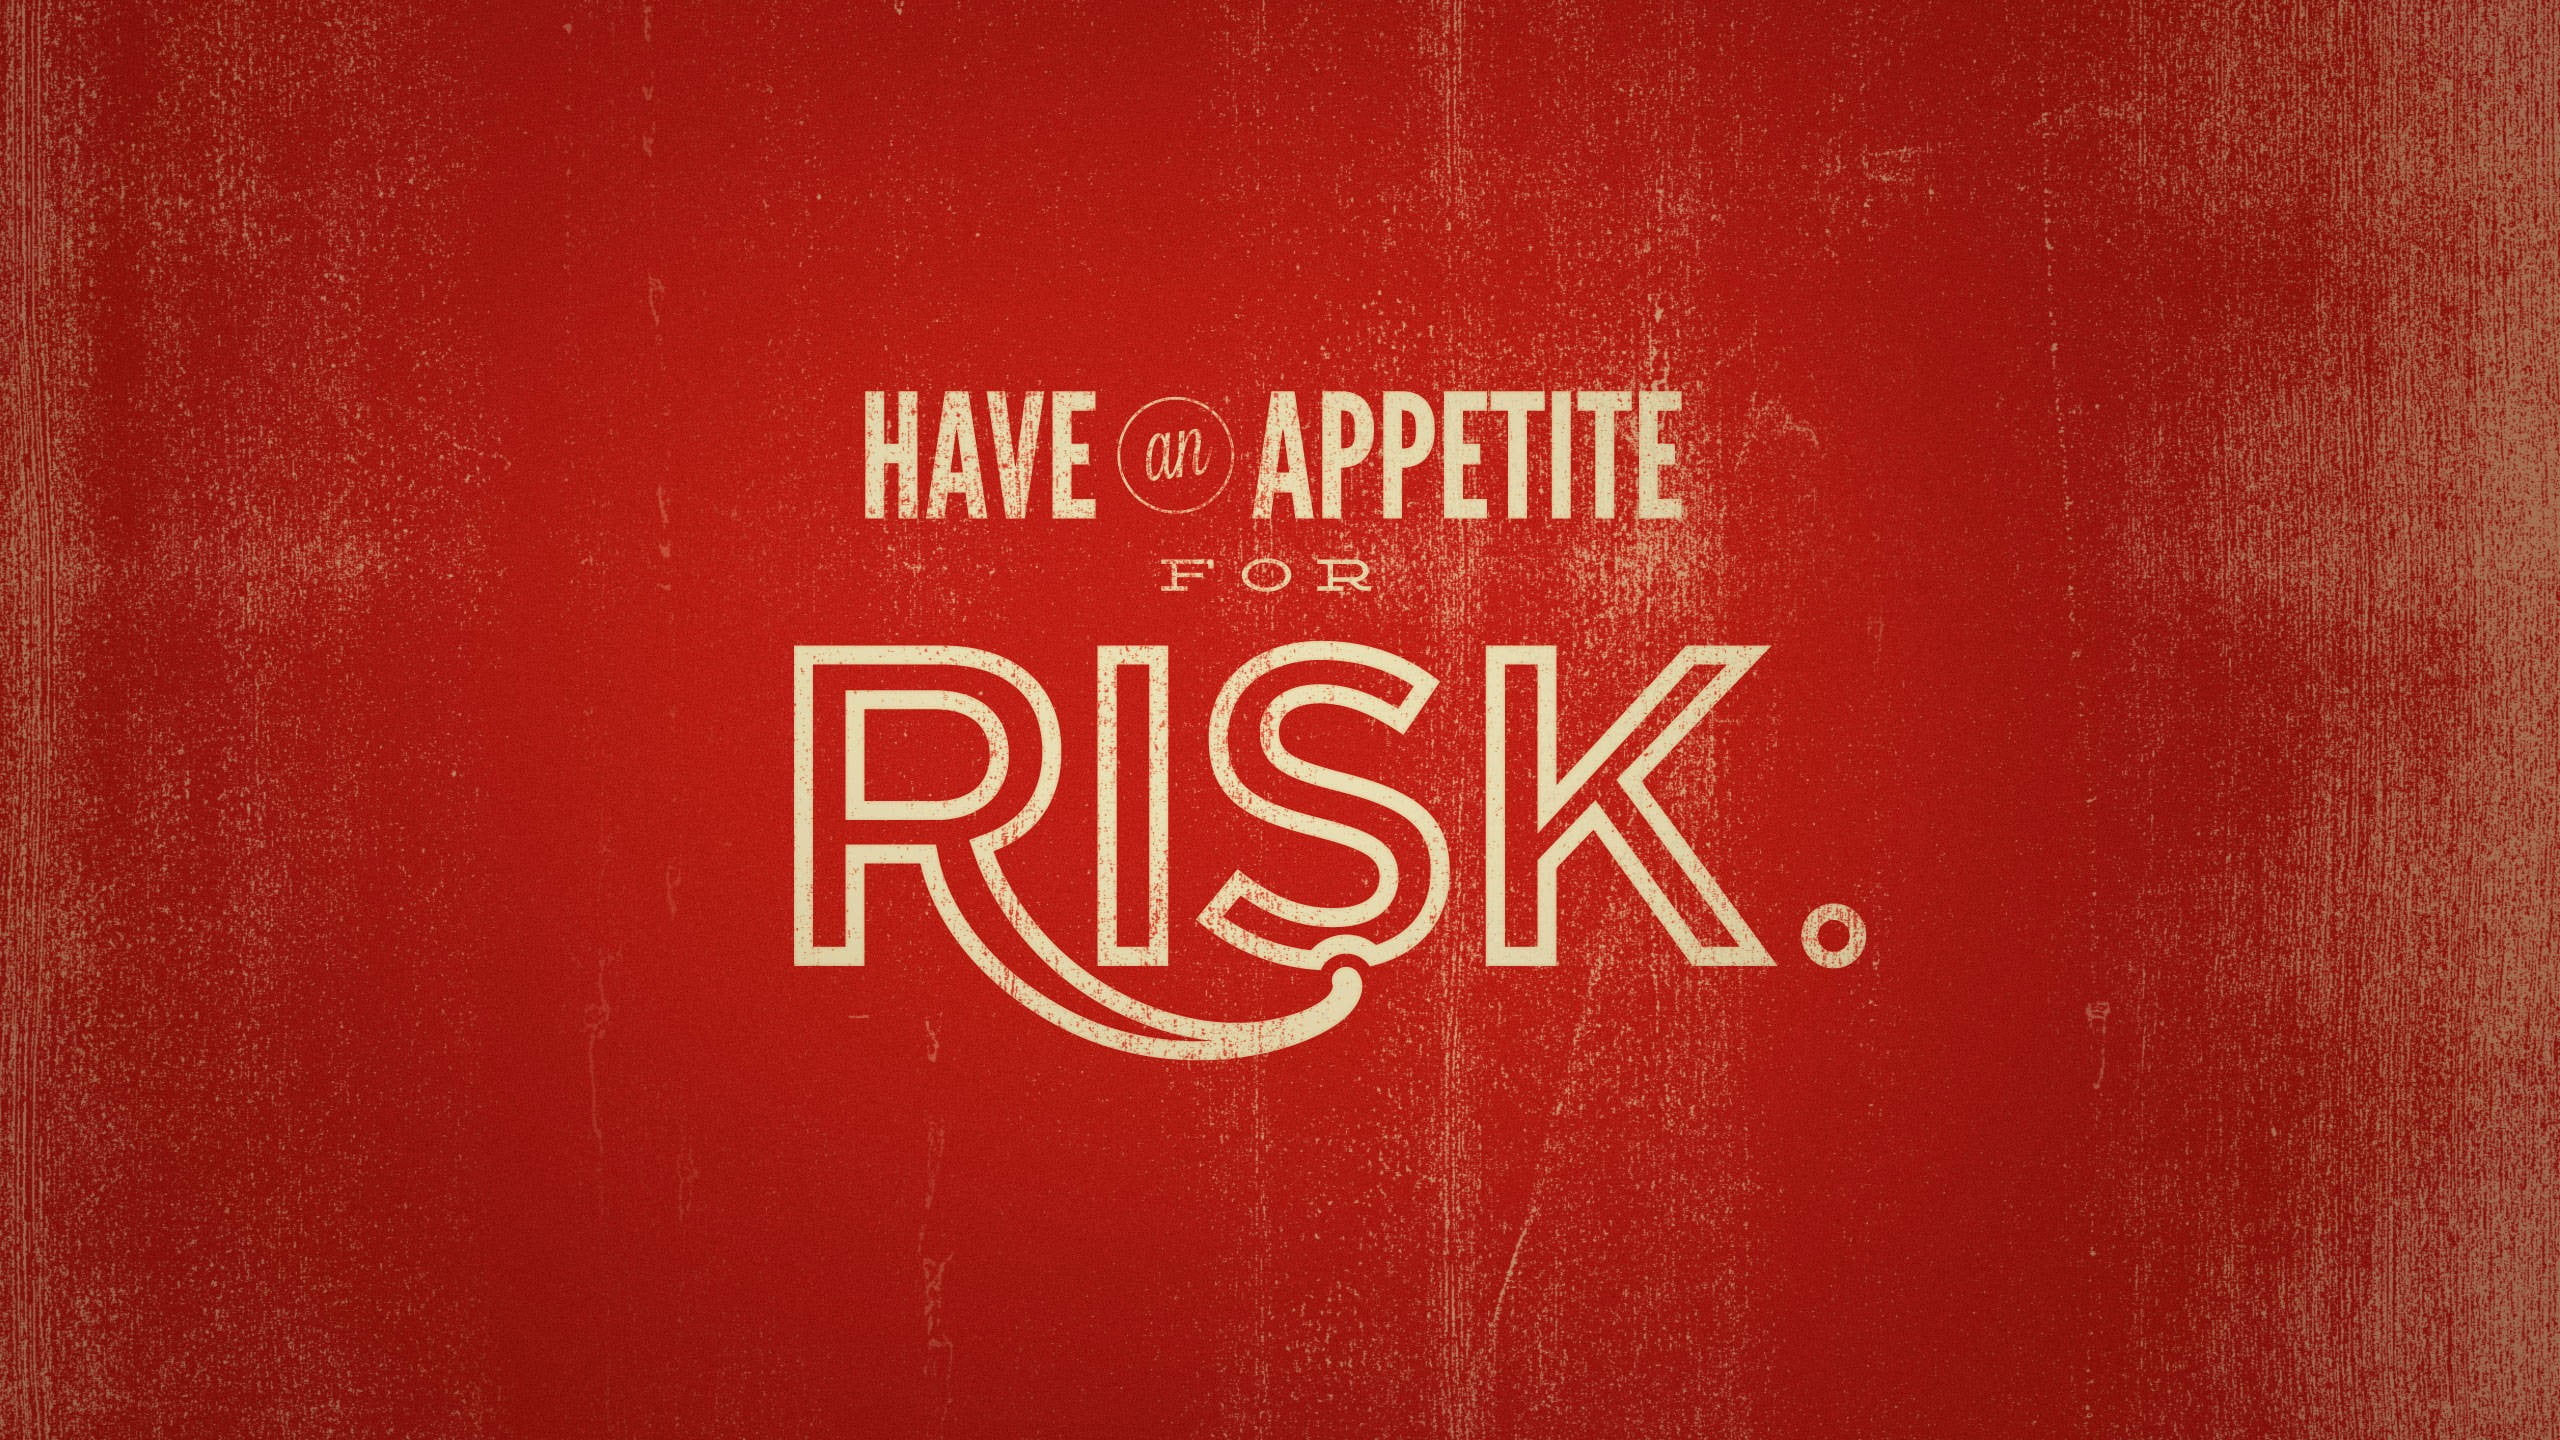 Have and Appetite for Risk text, quote, typography, motivational